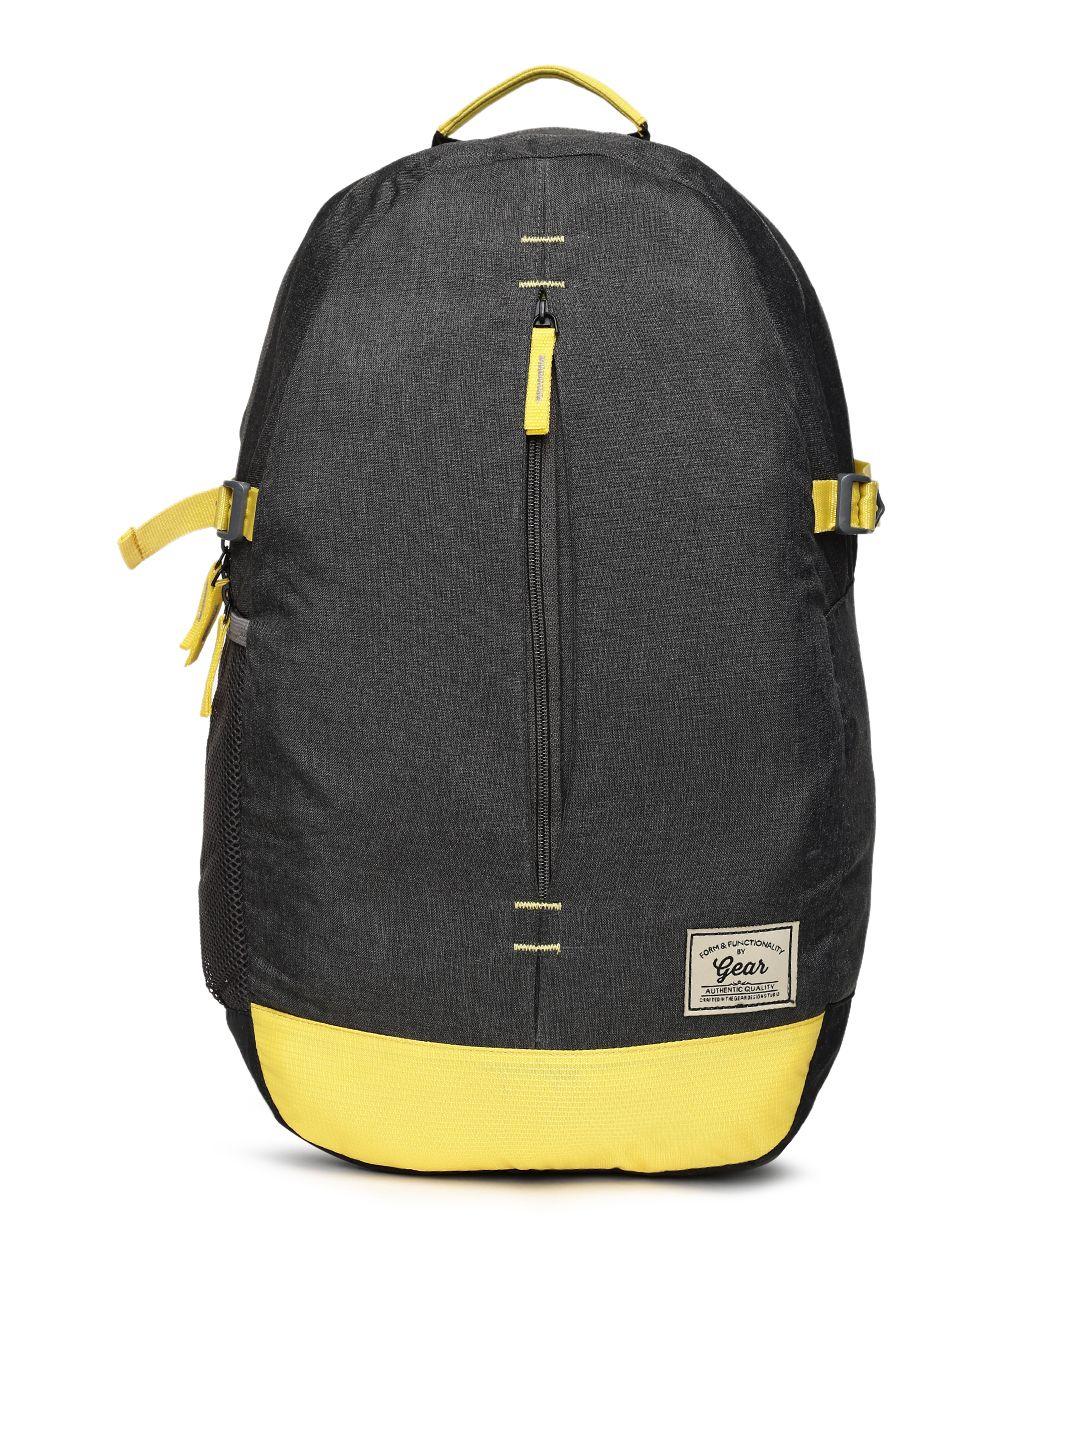 gear unisex charcoal grey solid backpack